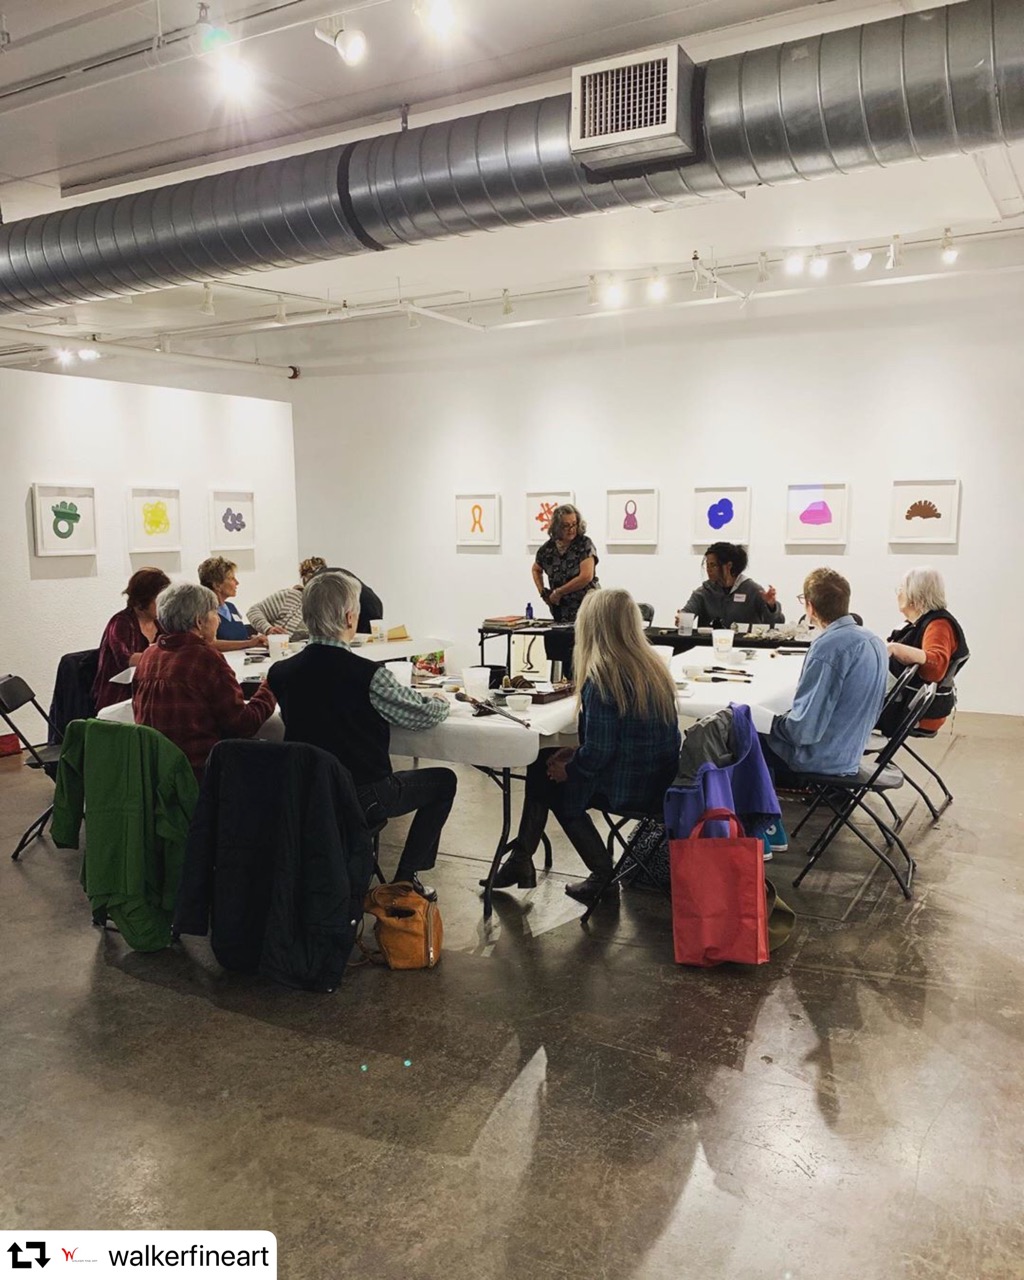 "Find Your Heart and Soul in Sumi e Brushwork" Workshop Group at Walker Fine Art, May 7, 2019